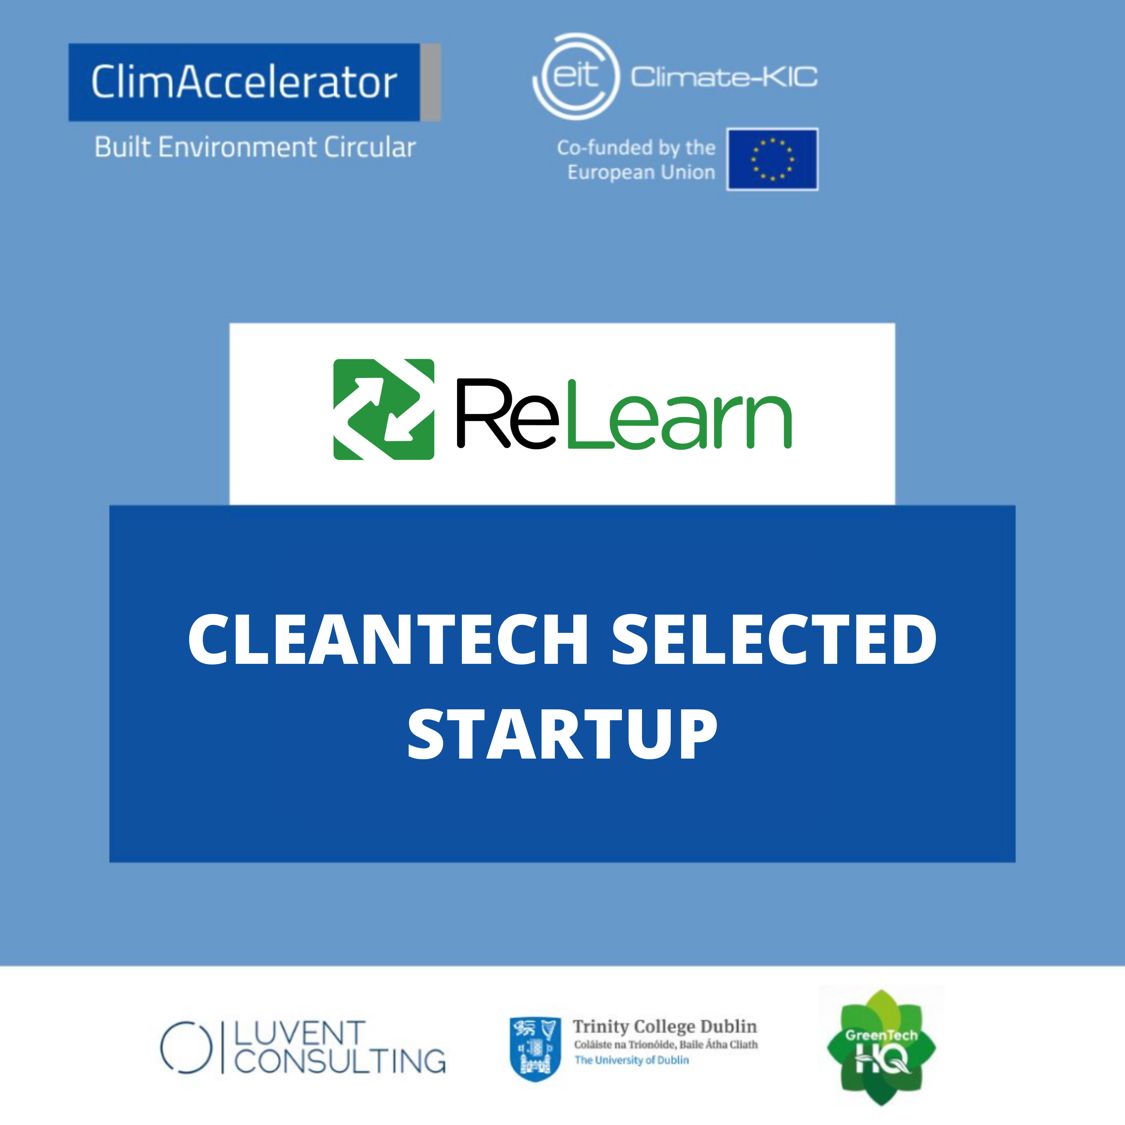 ReLearn selected for the Built Environment Circular ClimAccelerator programme